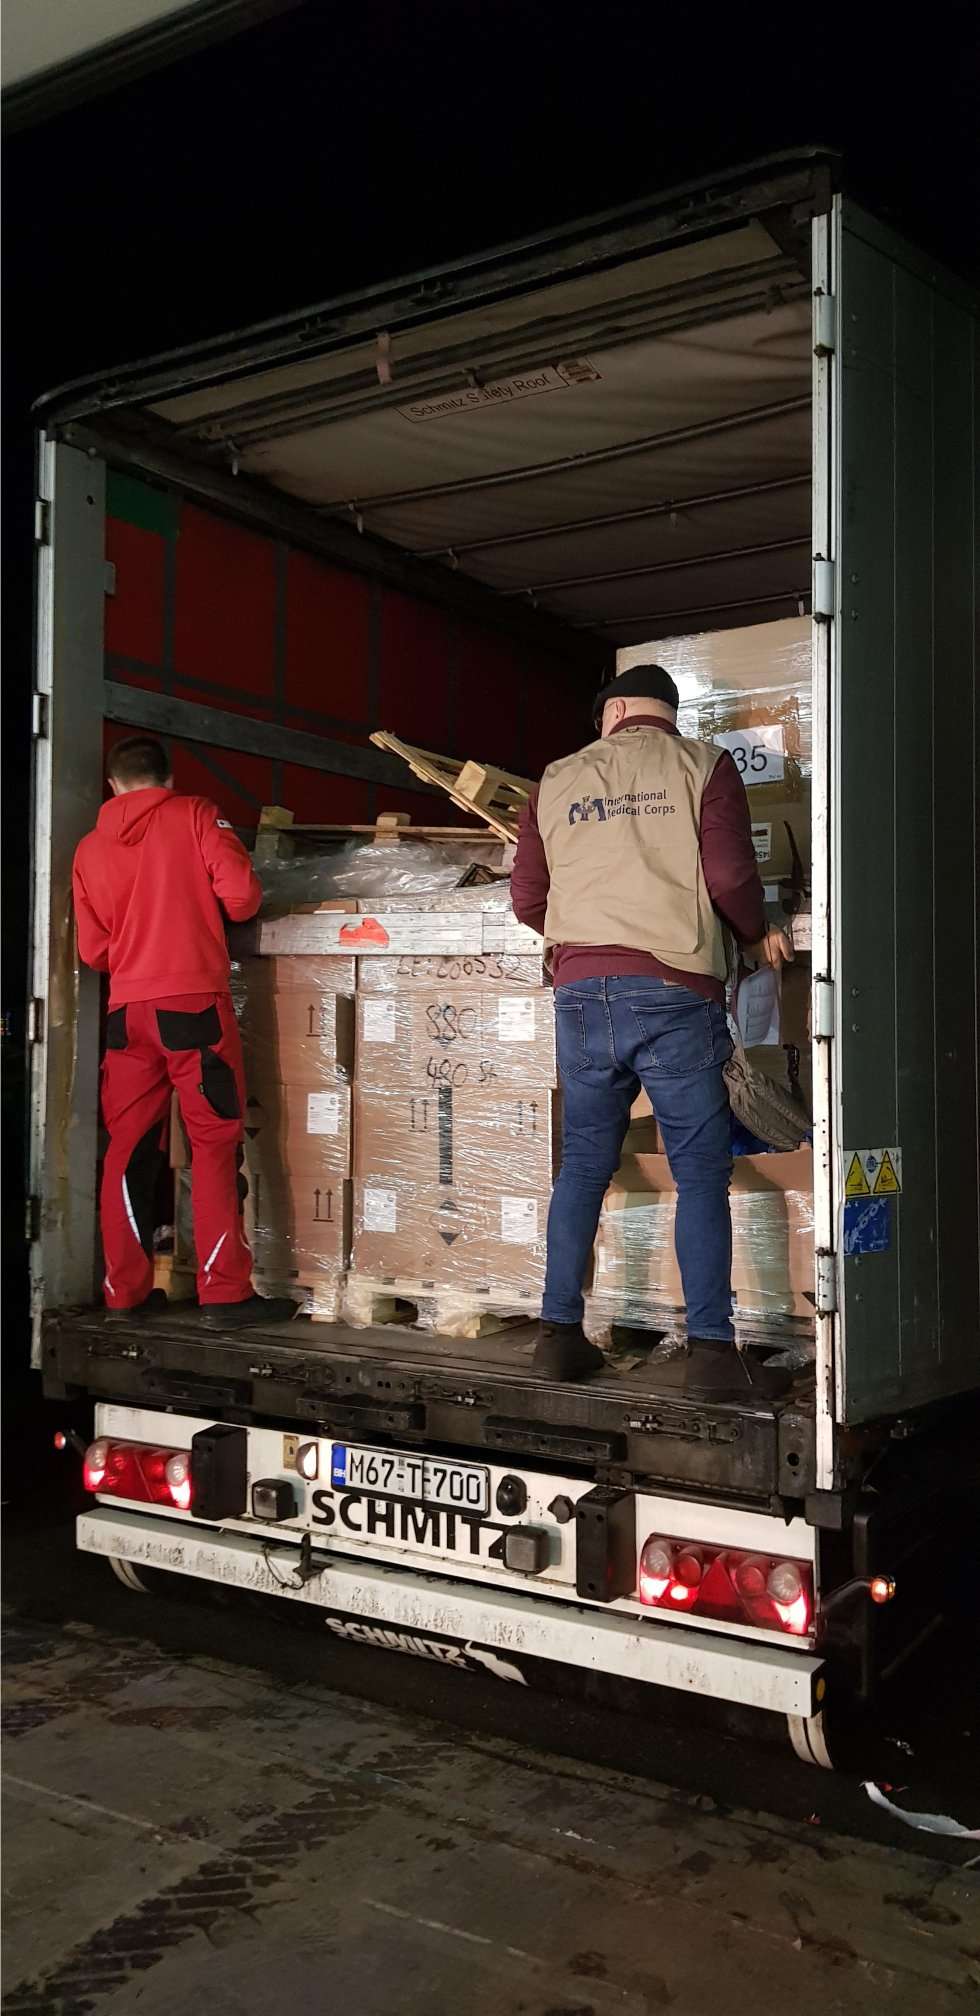 Donation provided by the Luftfahrt ohne Grenzen e.V. Wings of Help from Germany.